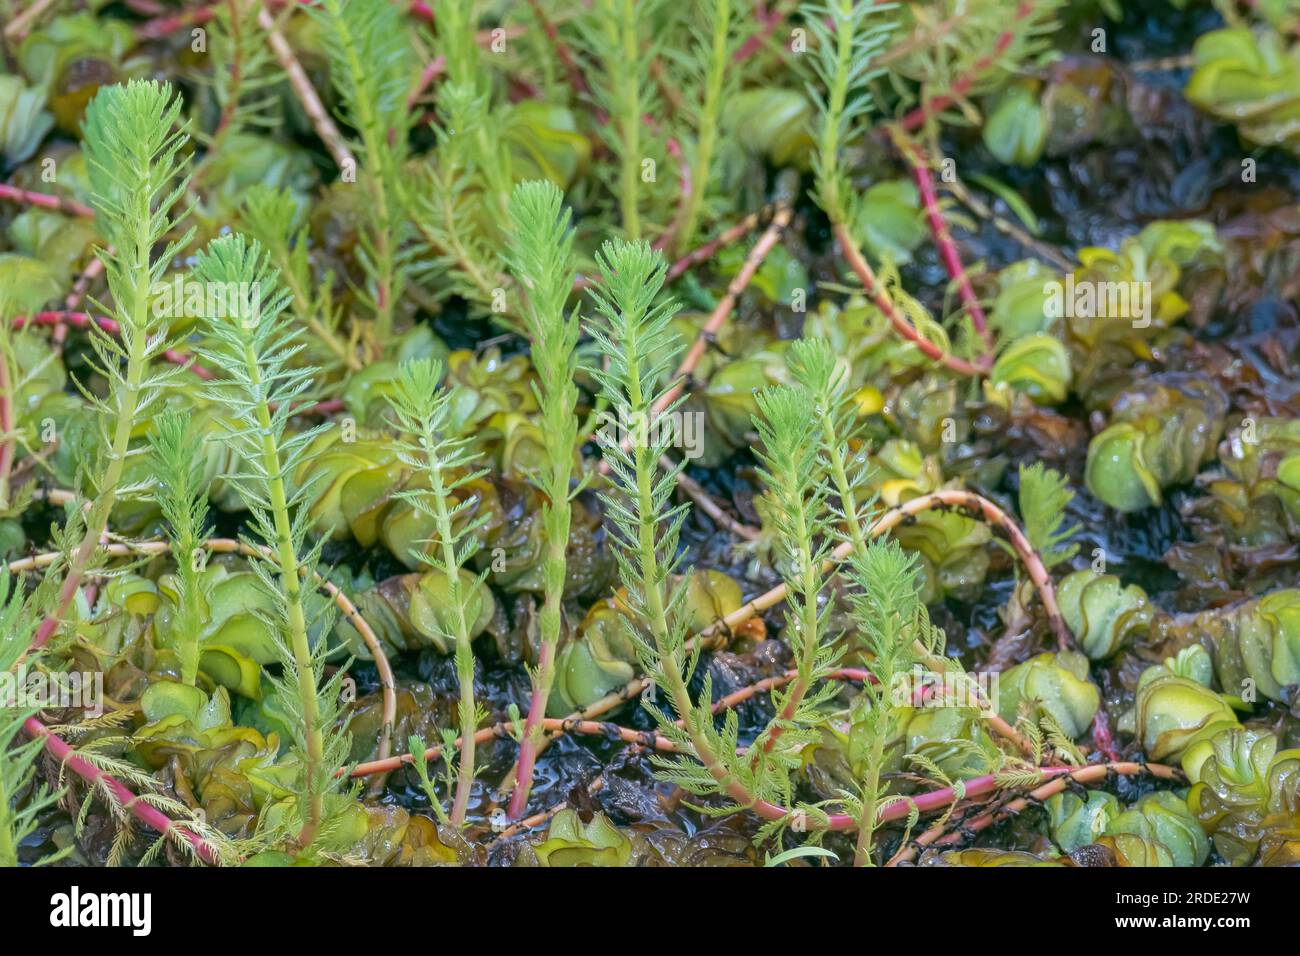 brazilian waterweed plants growing in water in a pond in summer outdoor Stock Photo